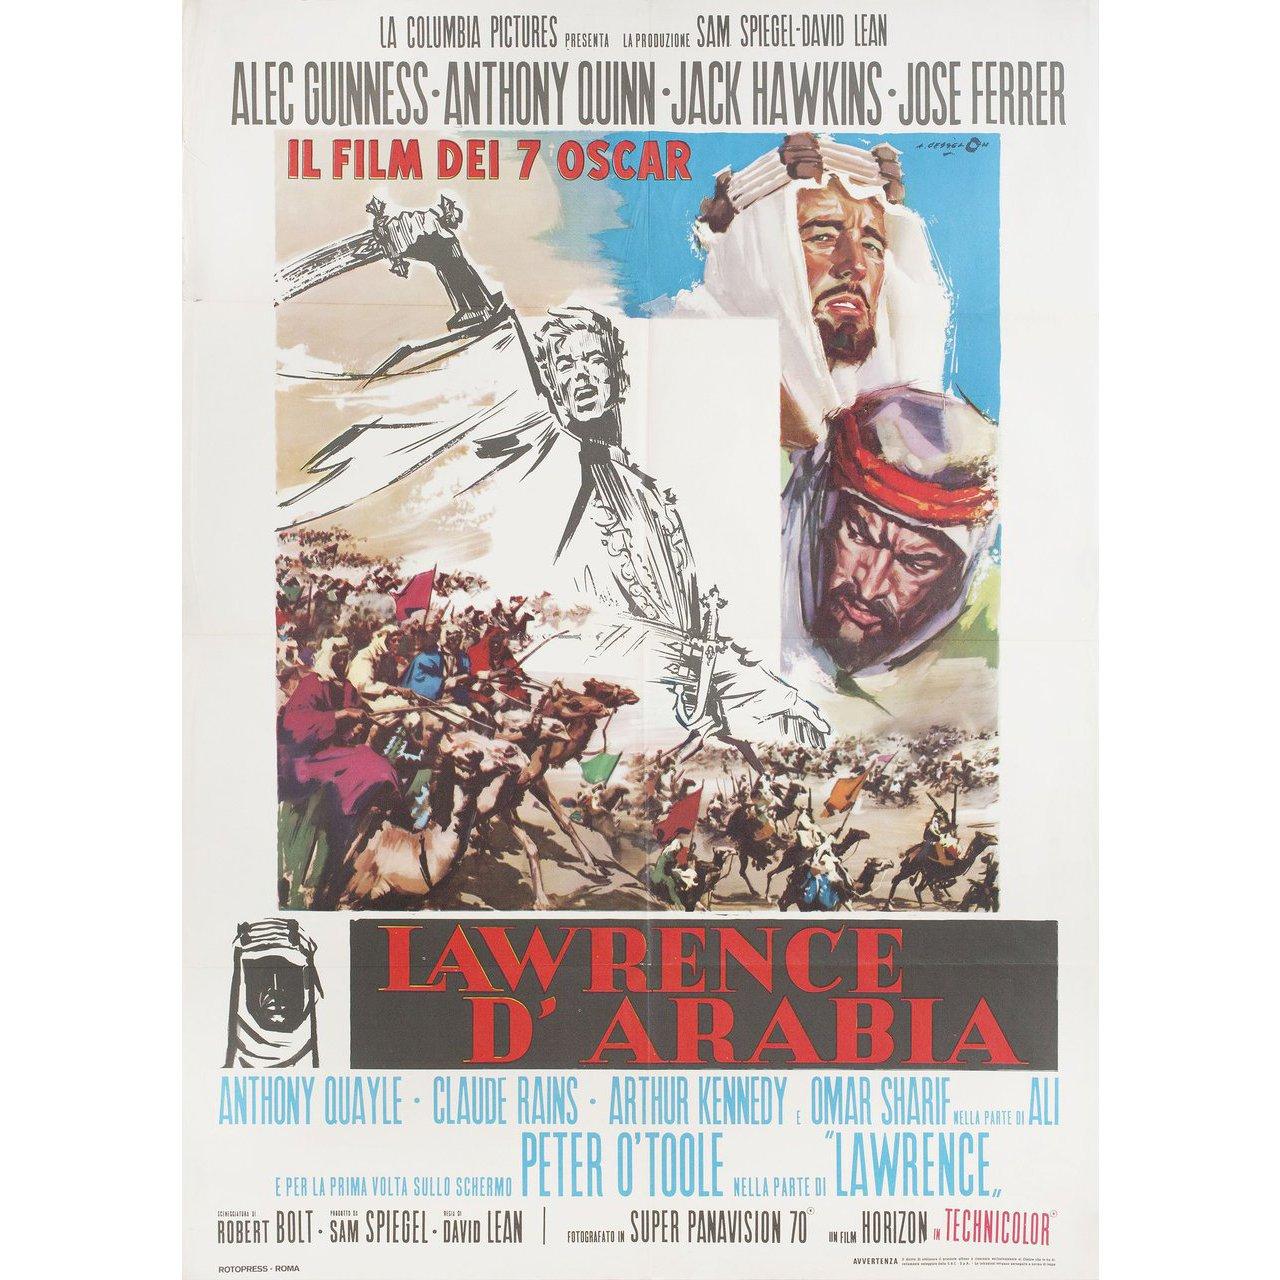 Original 1970s re-release Italian due fogli poster by Angelo Cesselon for the 1962 film Lawrence of Arabia directed by David Lean with Peter O'Toole / Alec Guinness / Anthony Quinn / Jack Hawkins. Good-Very Good condition, folded with repaired tears